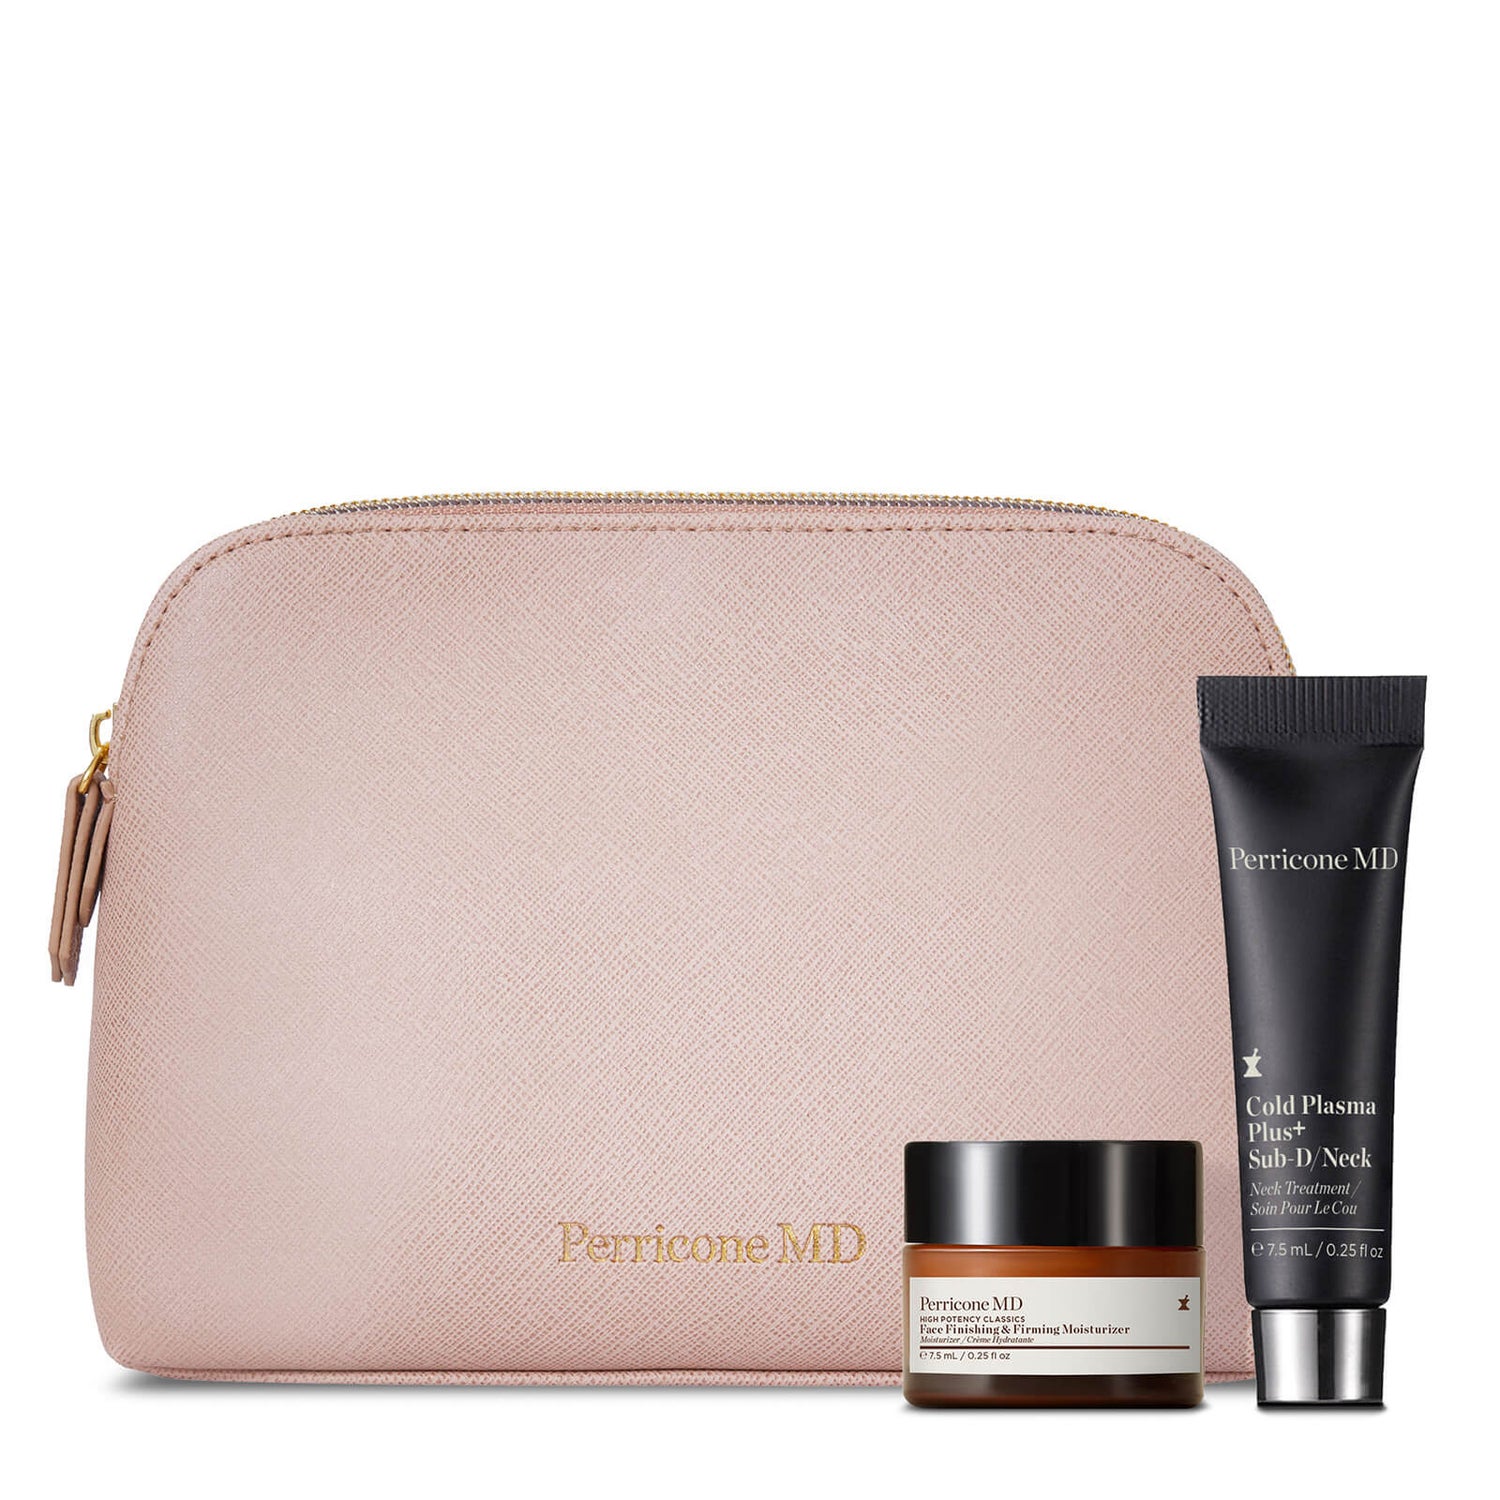 Perricone MD Spring Gift Set 2